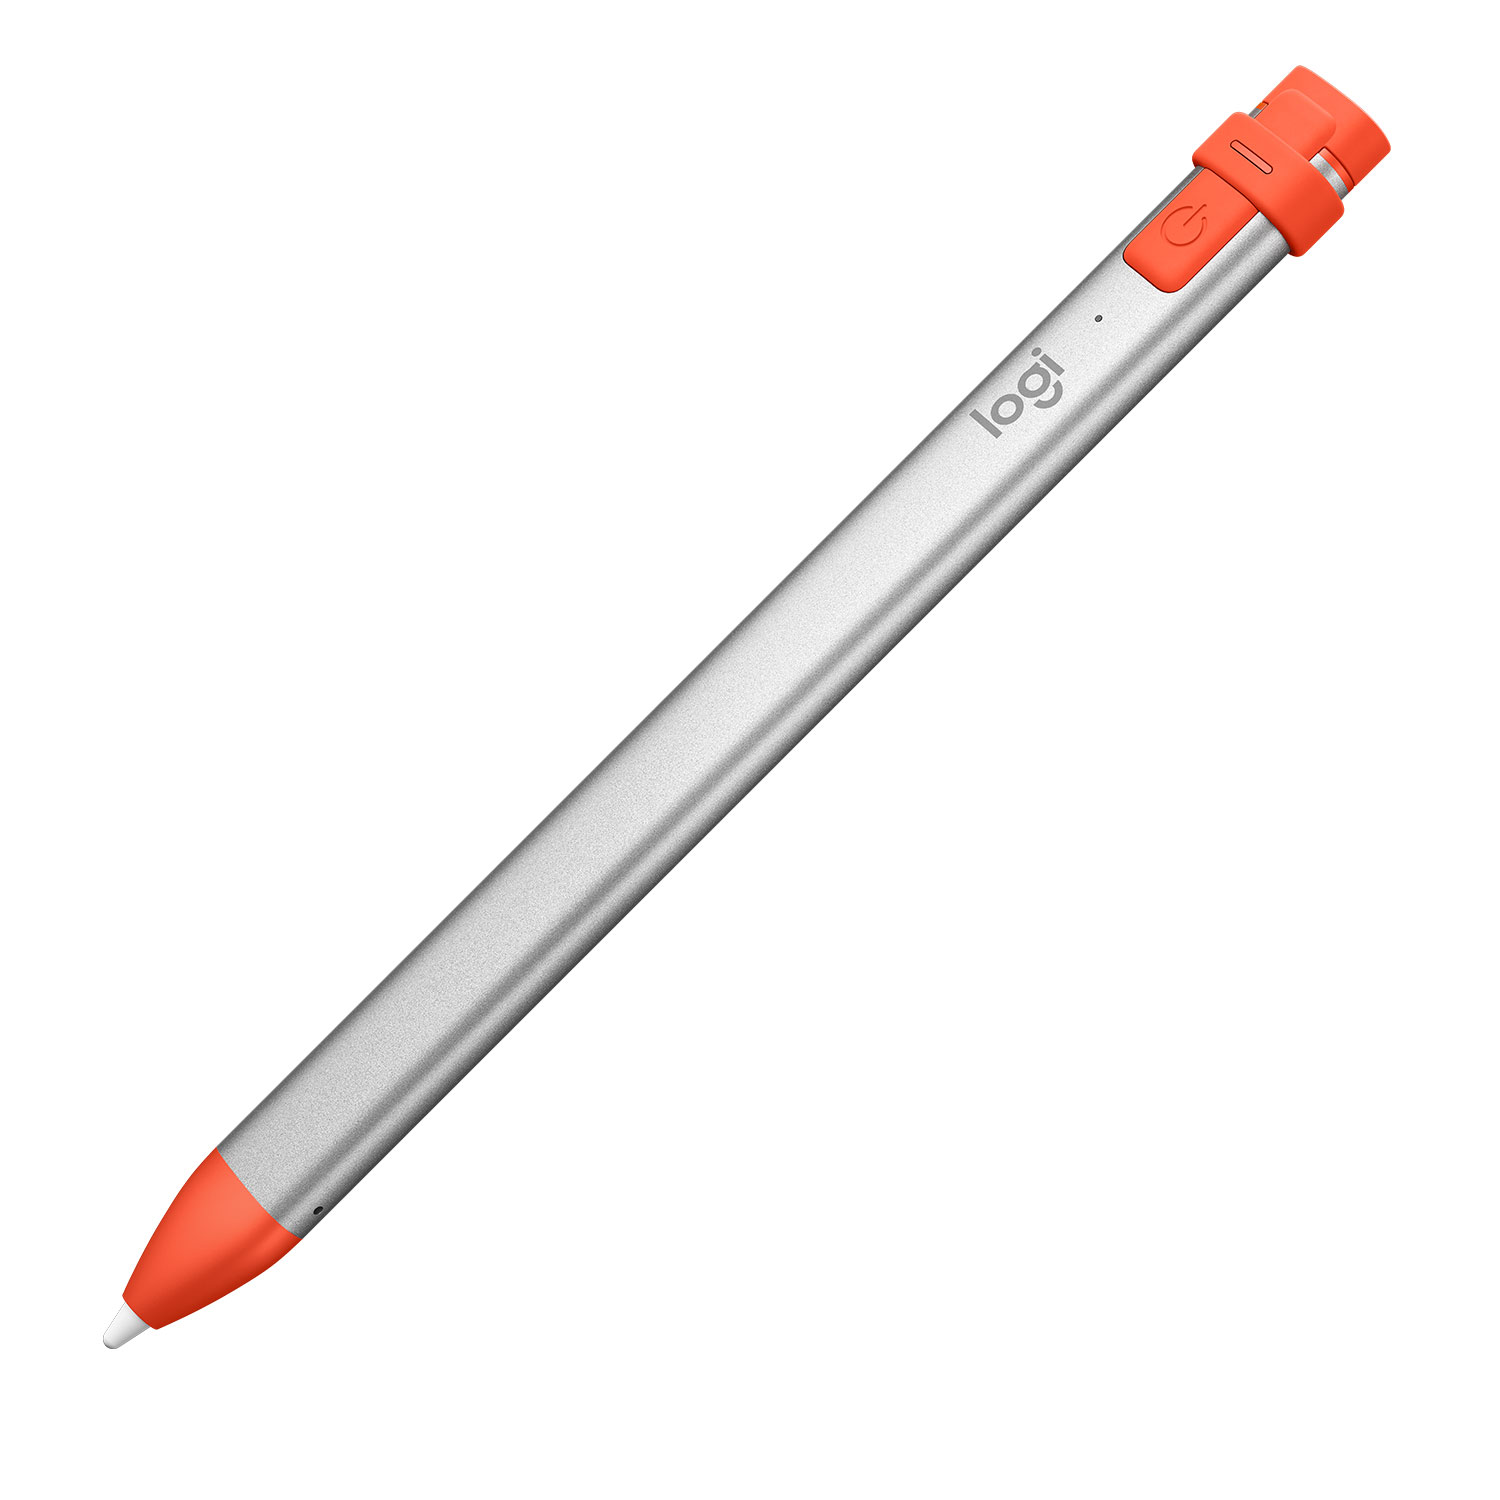 Logitech Crayon Digital Pencil for All Apple iPads (2018 releases